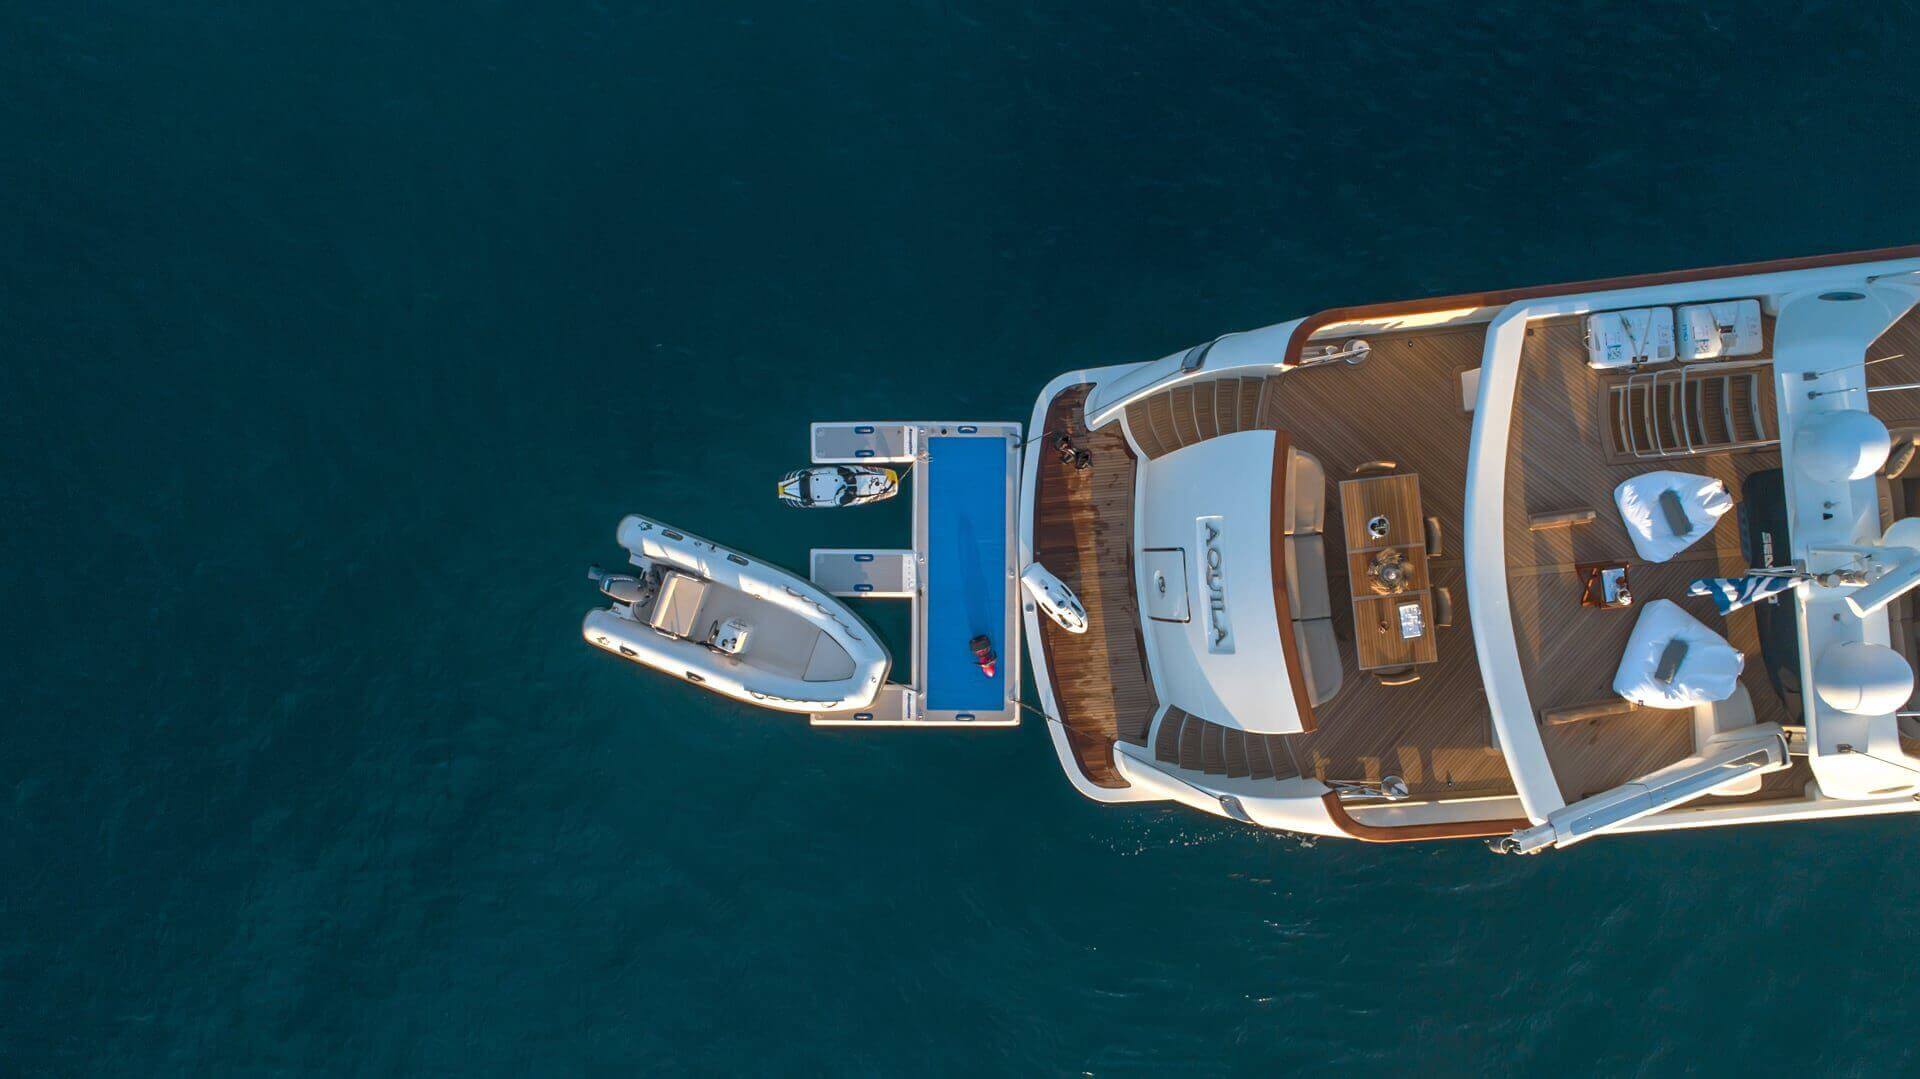 Alcyone Yachting - Yacht charters in Greece. Yacht charters in Greek islands with crew. Private yacht cruises in Greek islands